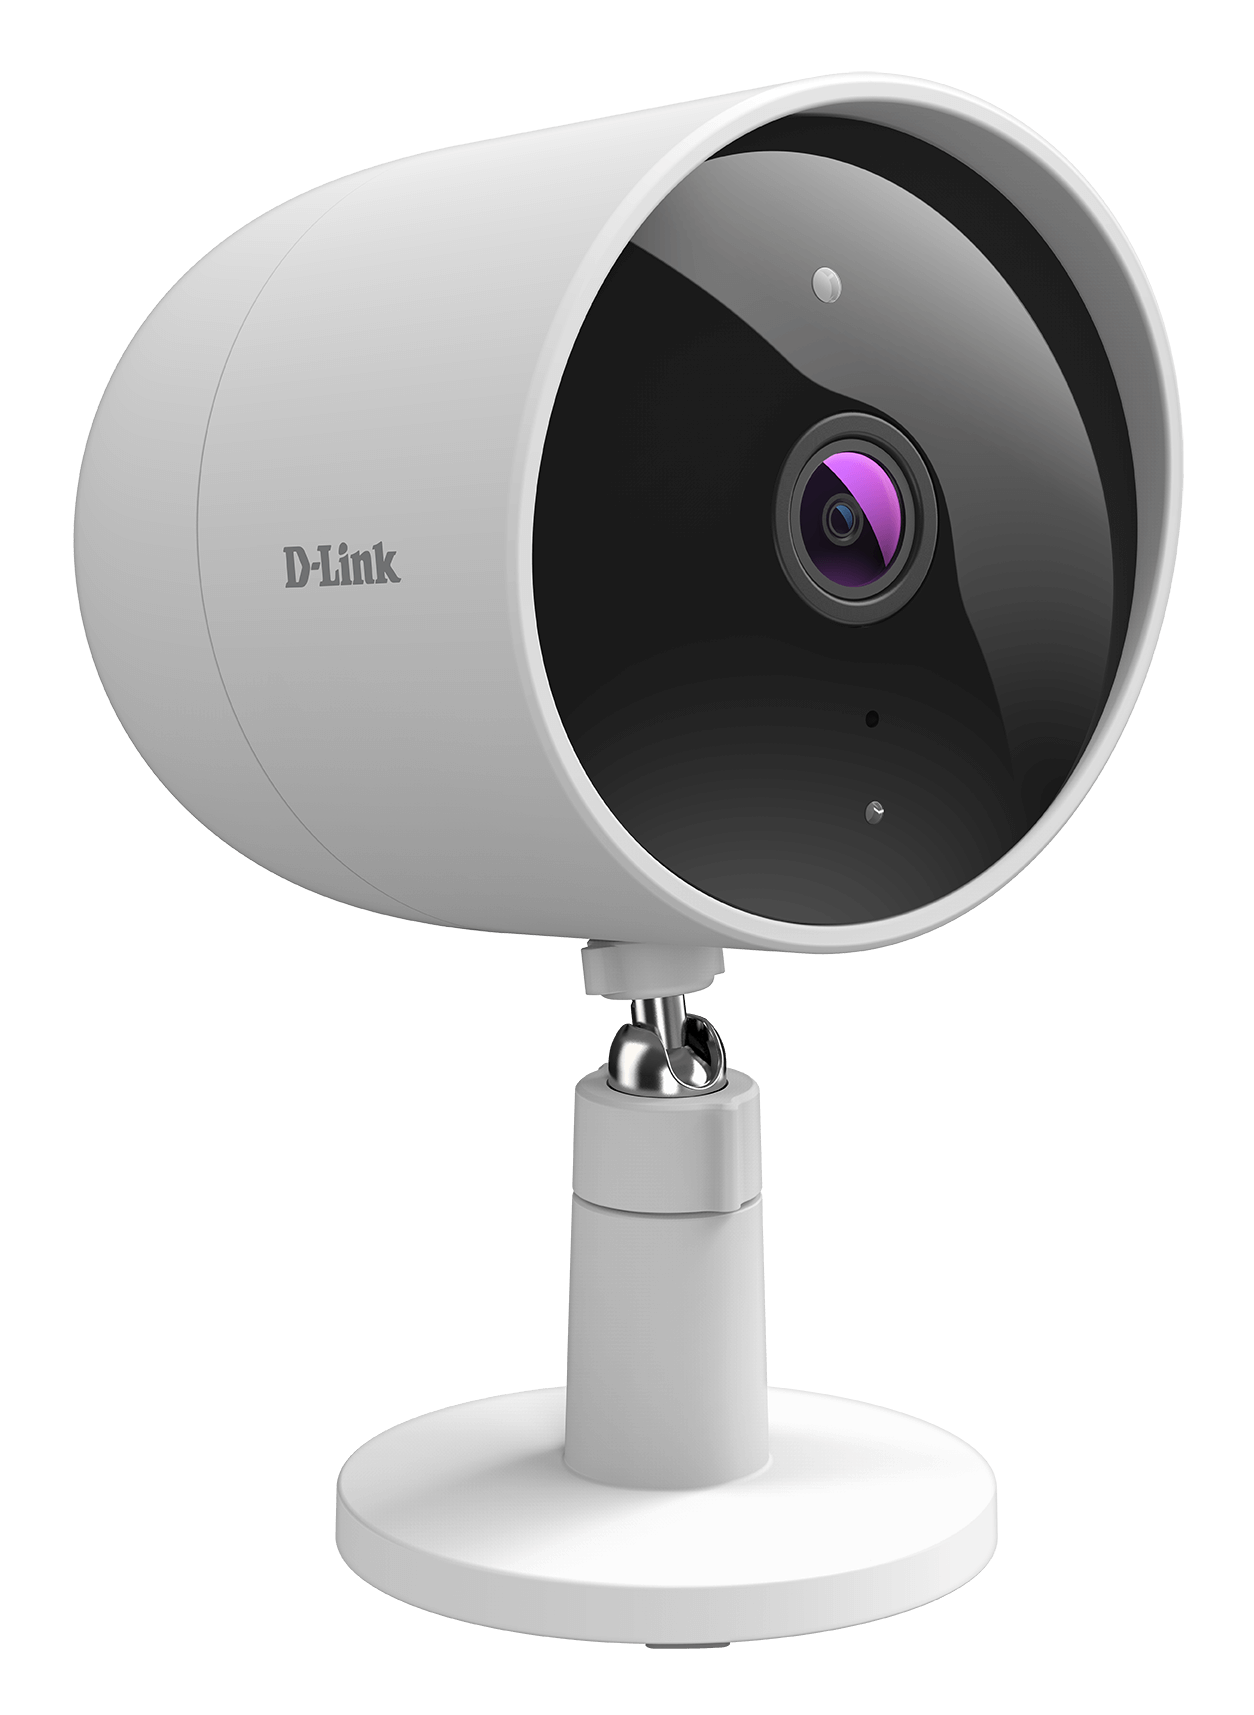 DCS-8302LH Full HD Outdoor Wi-Fi Camera - right side.